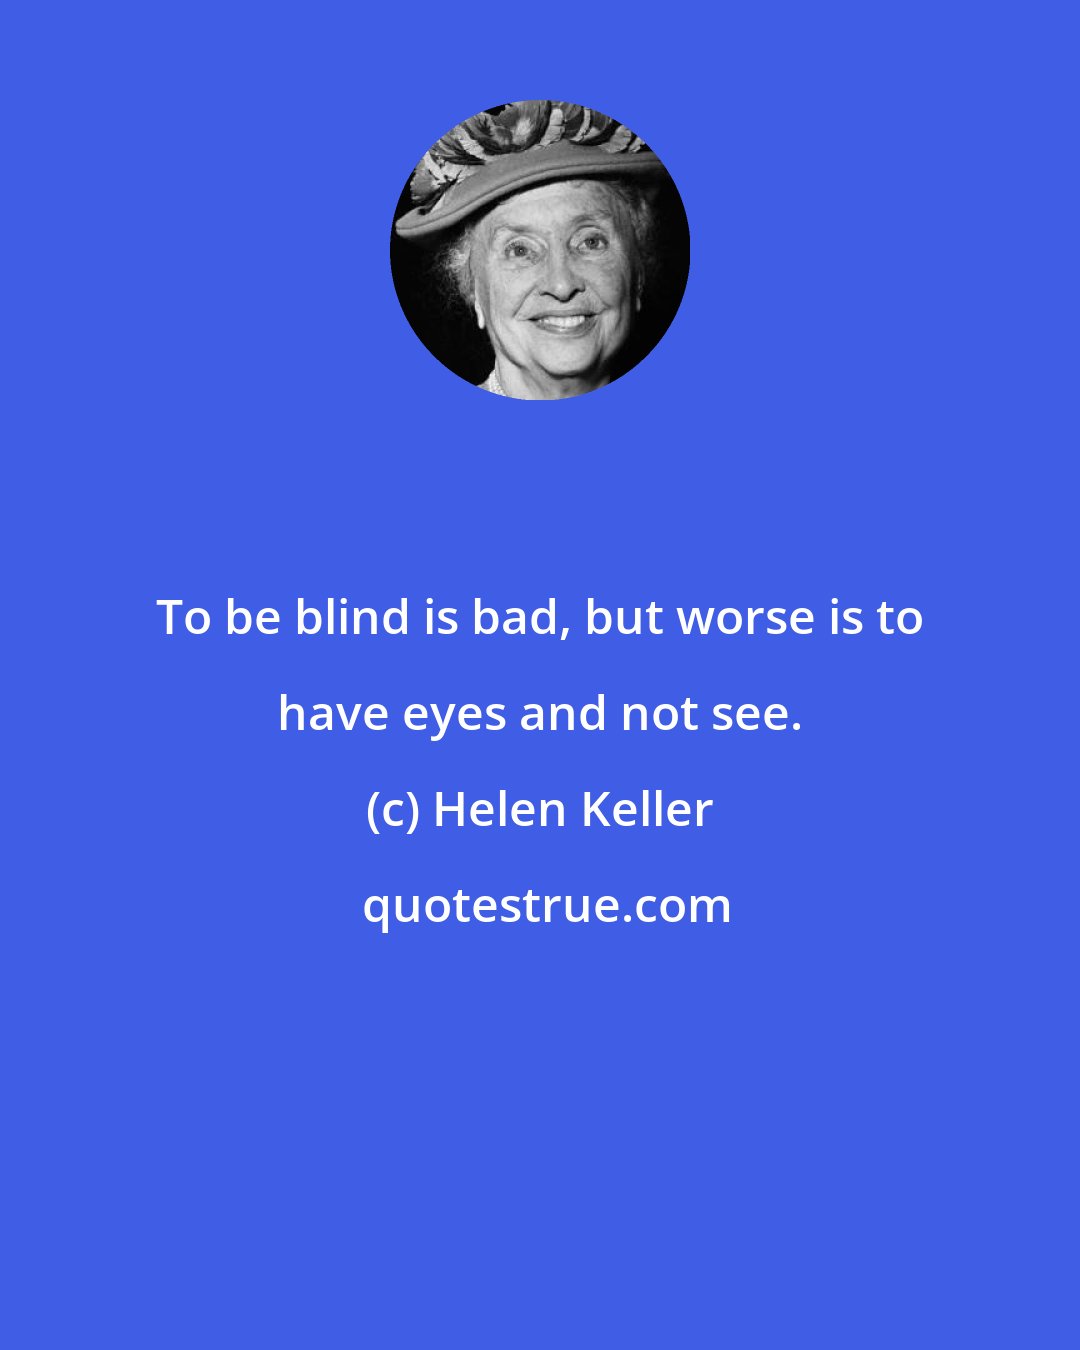 Helen Keller: To be blind is bad, but worse is to have eyes and not see.